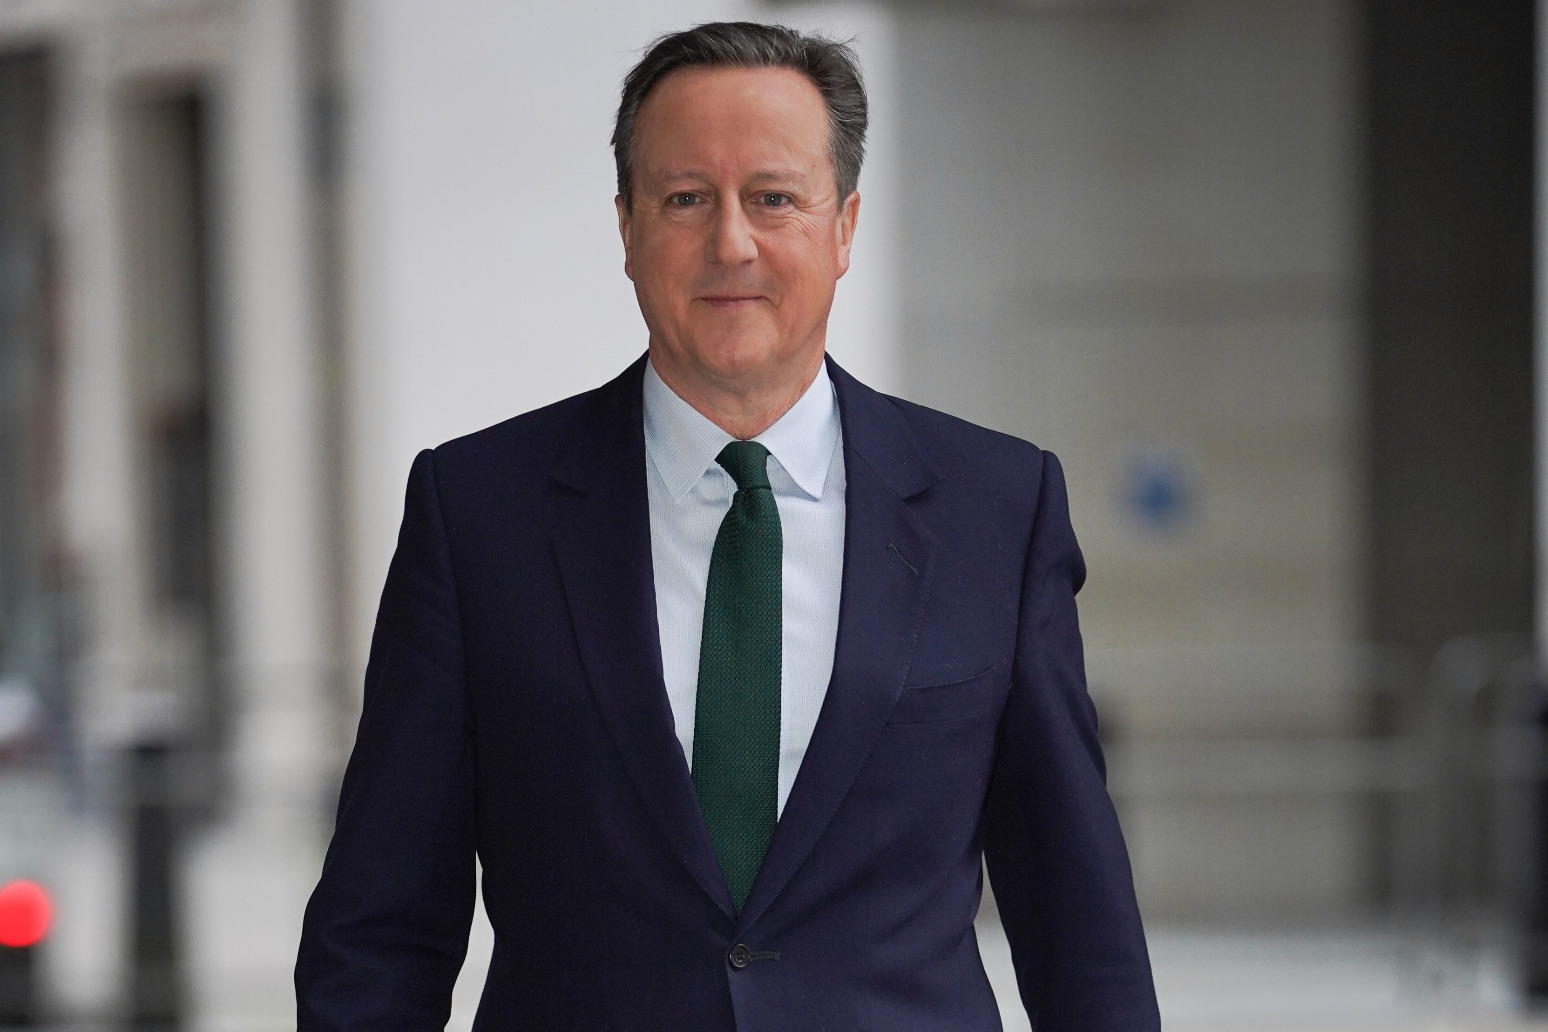 Cameron to urge ‘strength, resilience and unity’ on visit to Berlin 